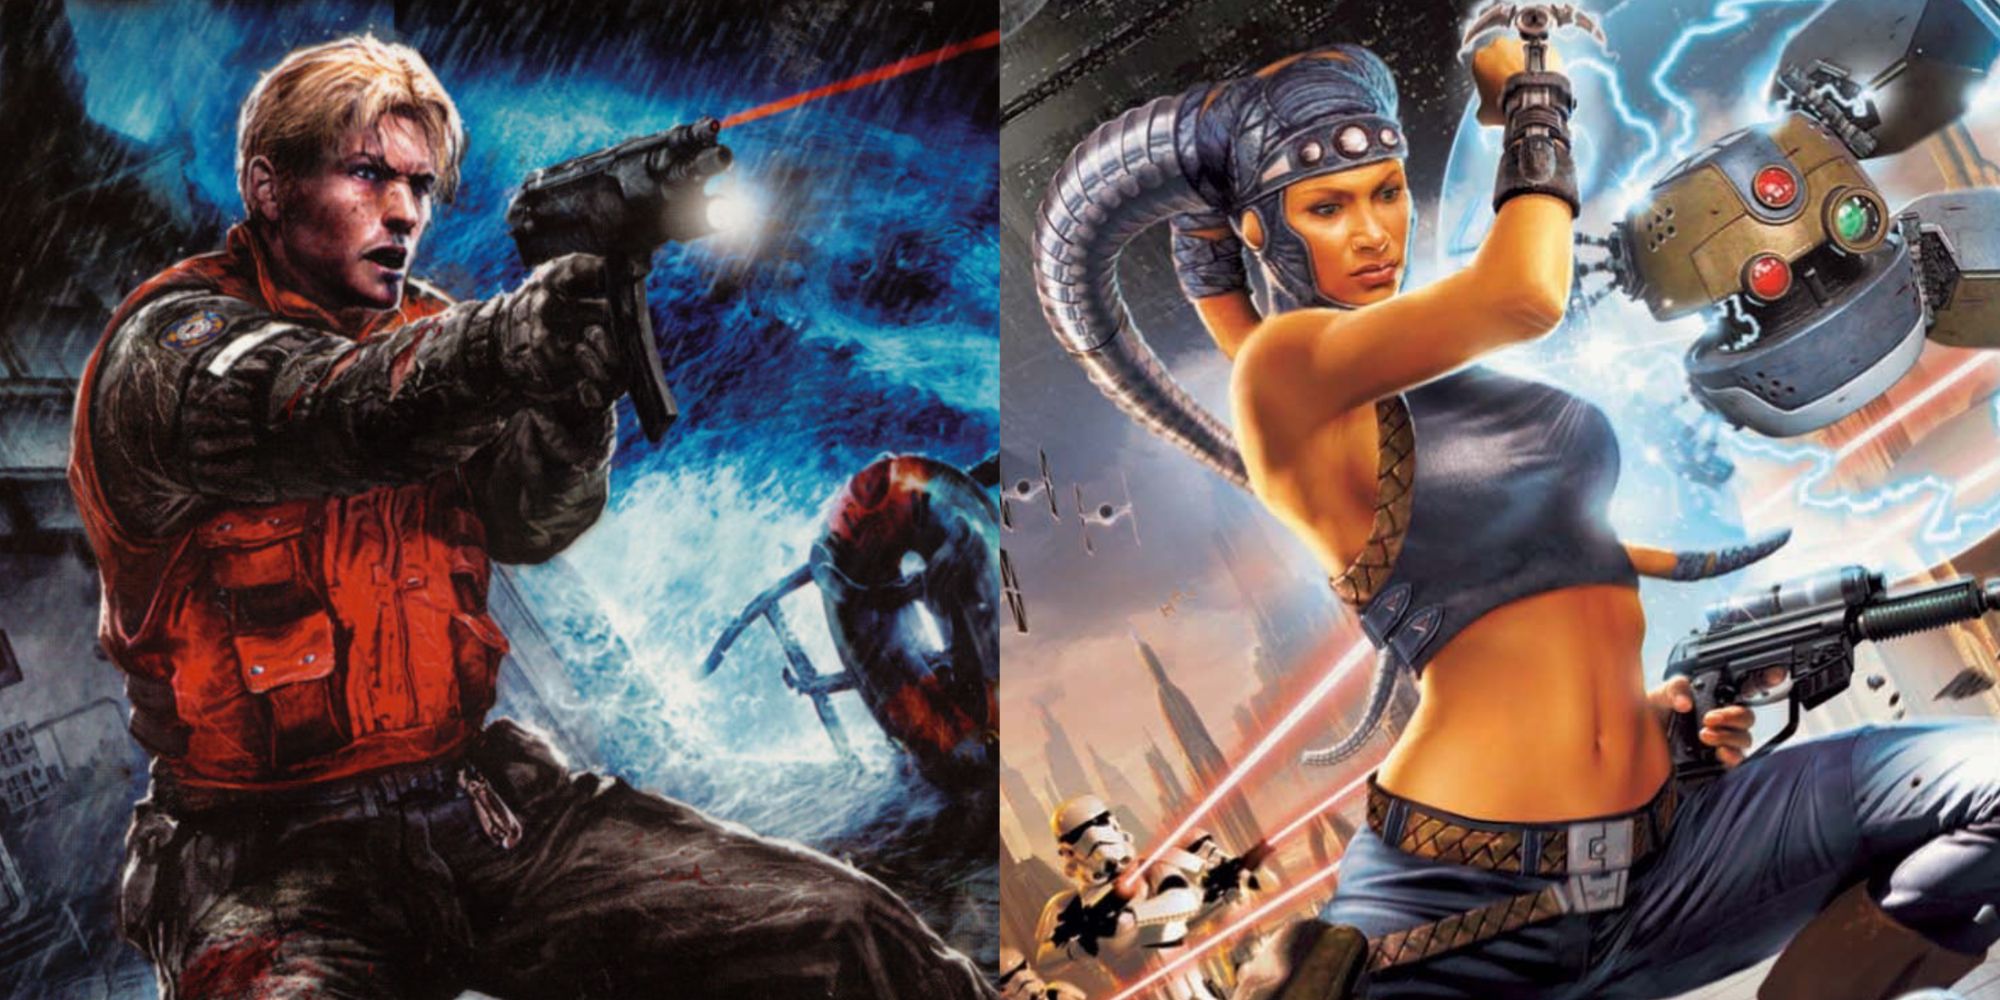 Split image of cover artwork for Cold Fear and Star Wars Lethal Alliance